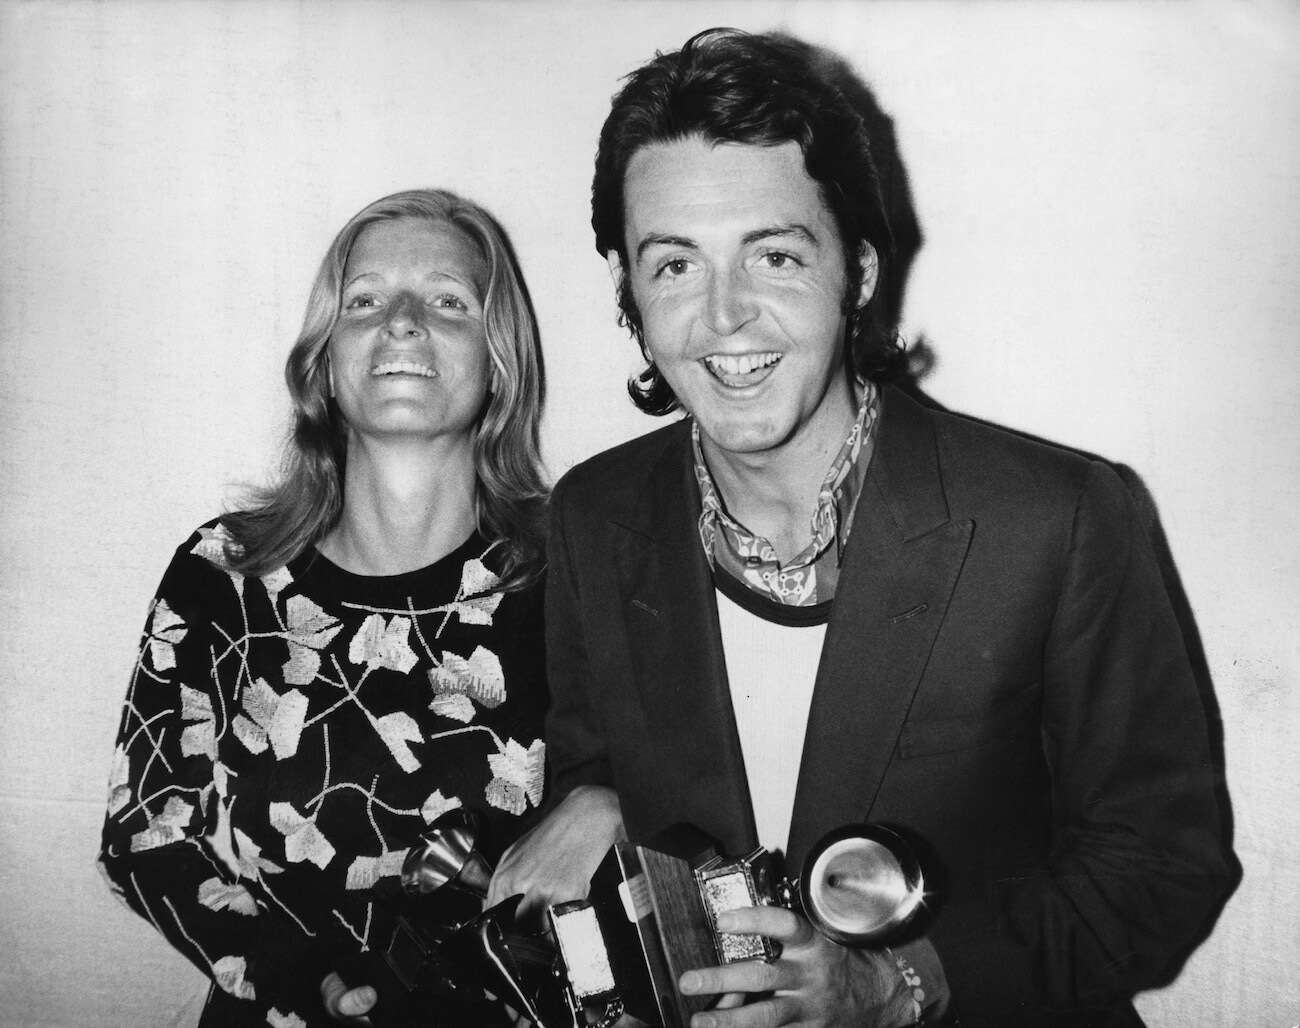 Paul McCartney and his wife, Linda, at the 1971 Grammy Awards.